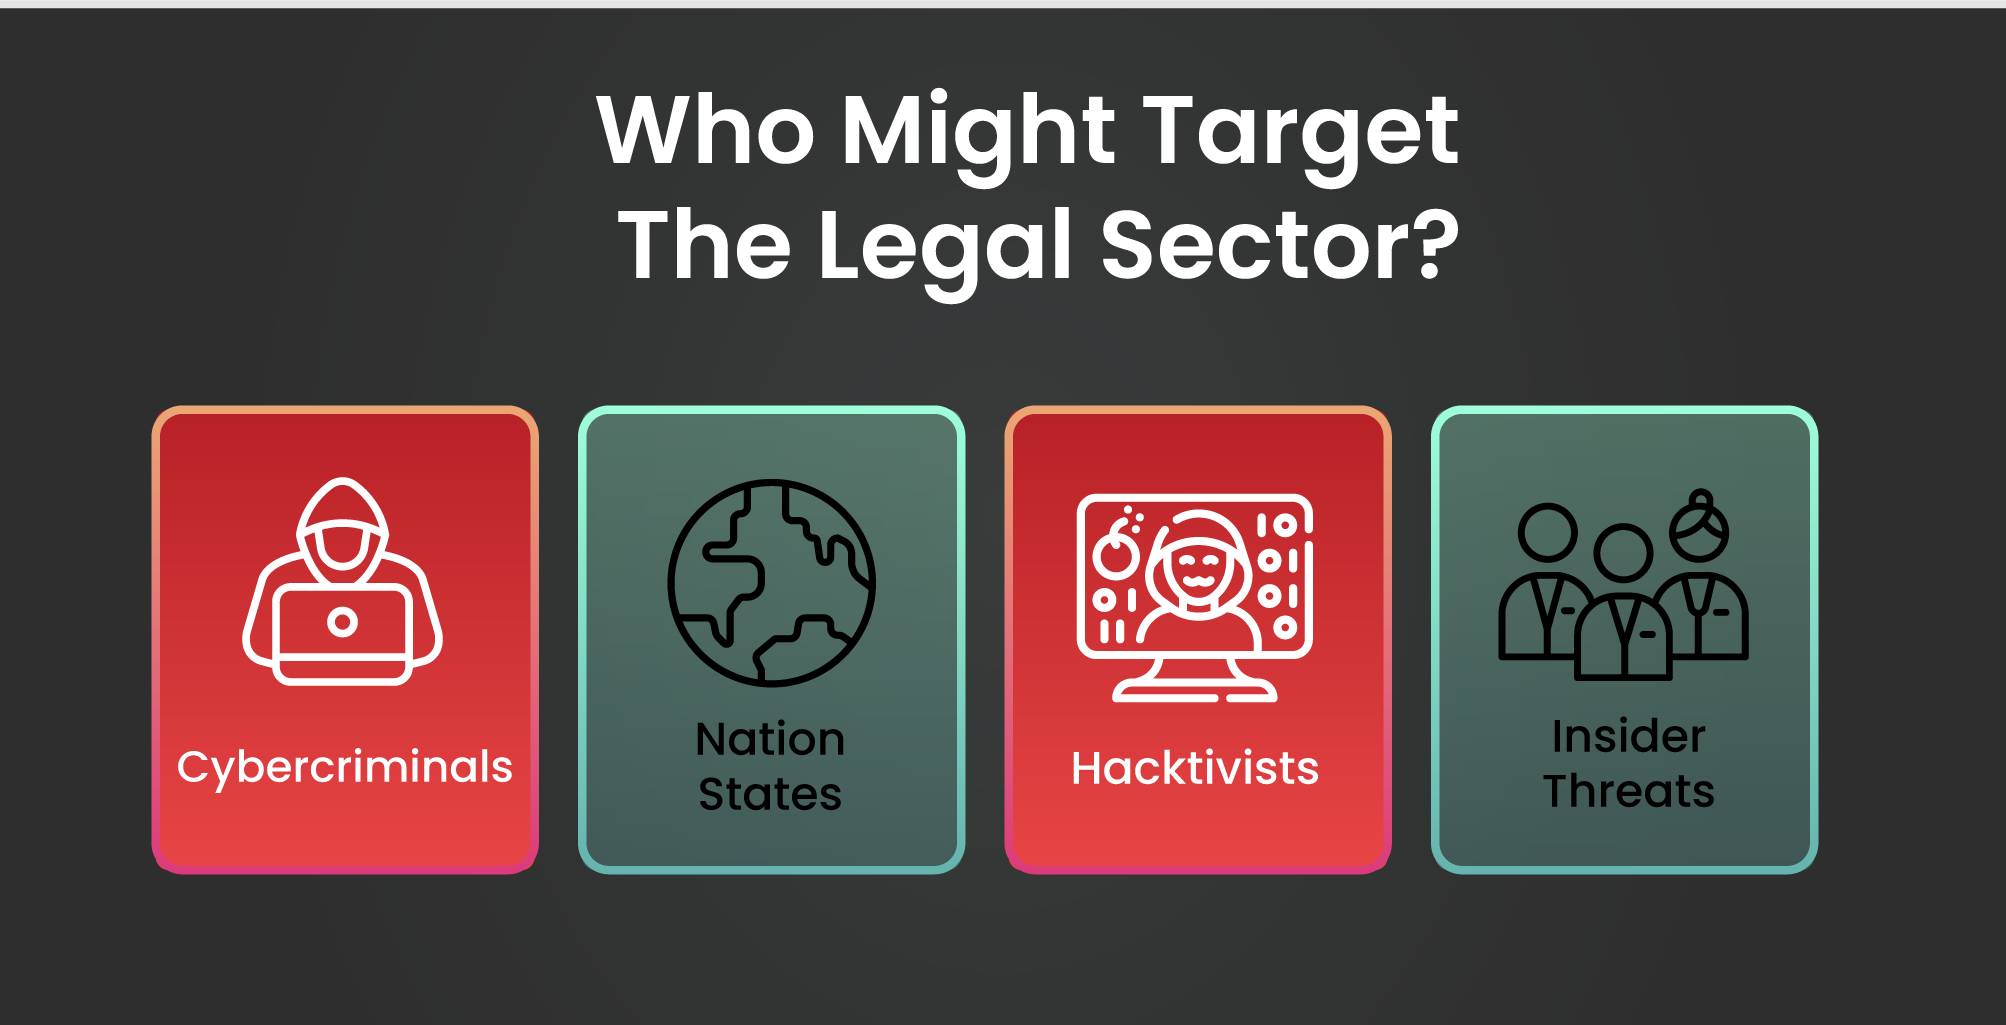 Who Might Target The Legal Sector?